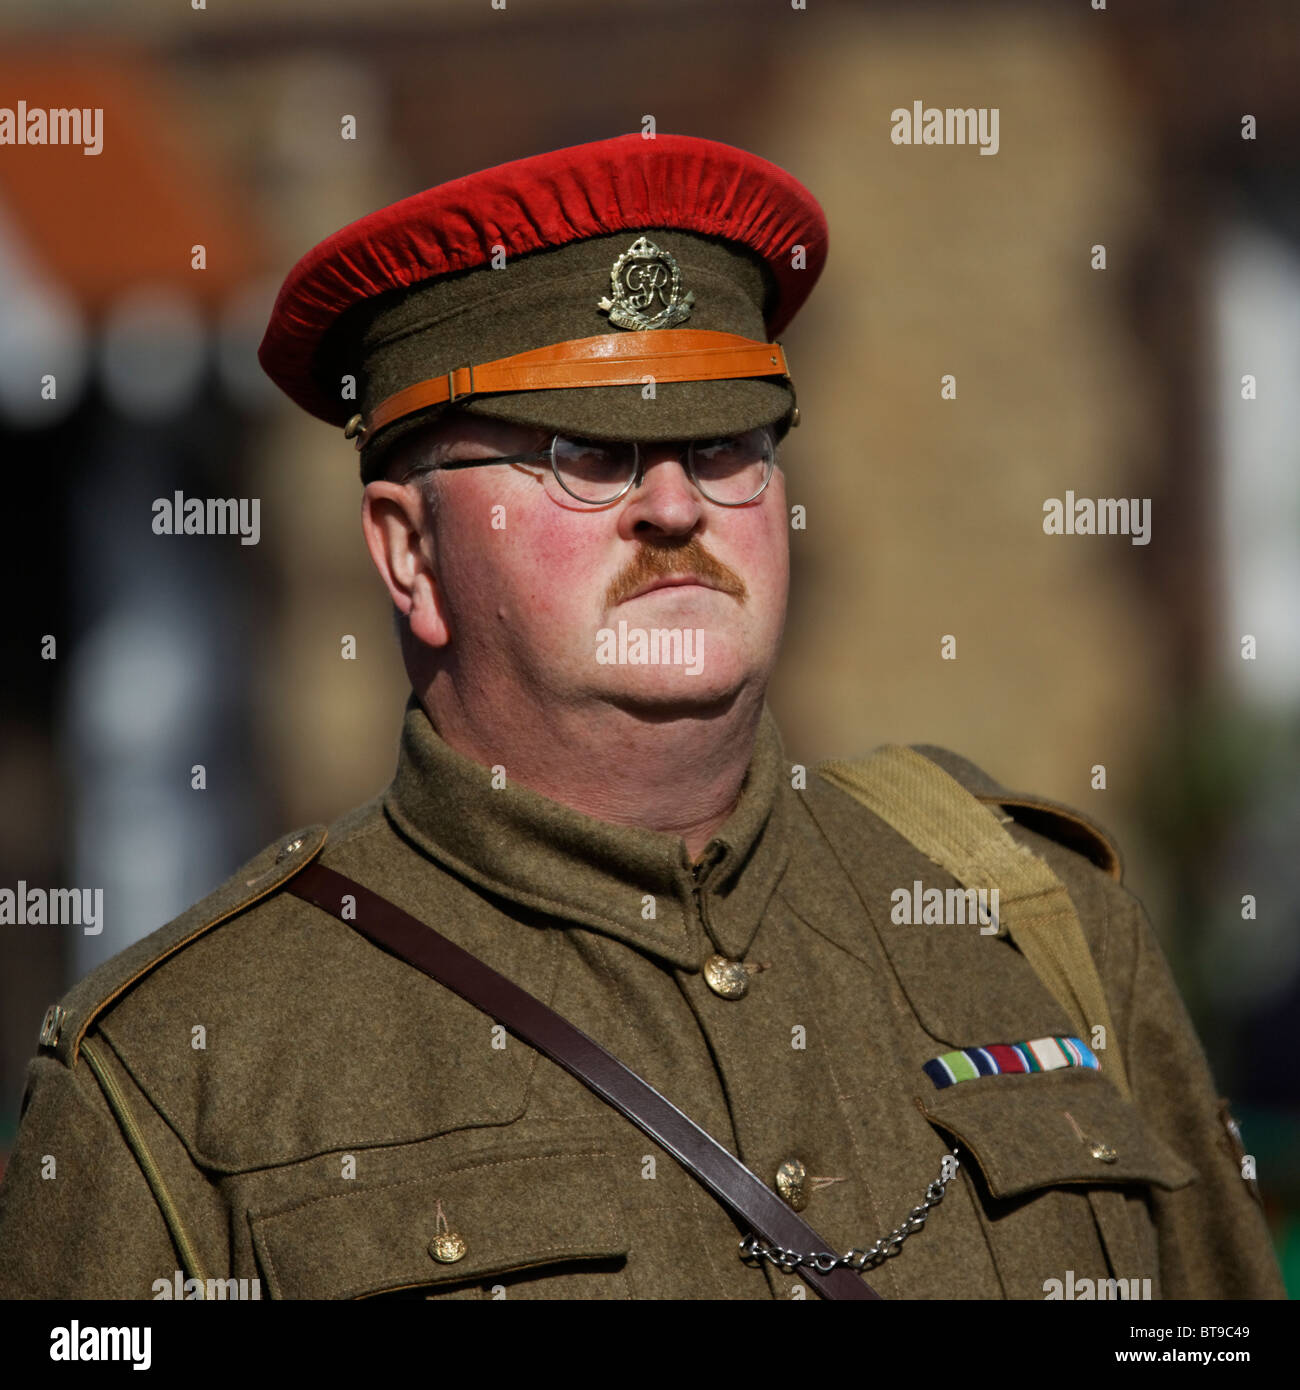 1940s Red Cap British Army Royal Military Police Officer Moustache & Wire Rim Spectacles Stock Photo